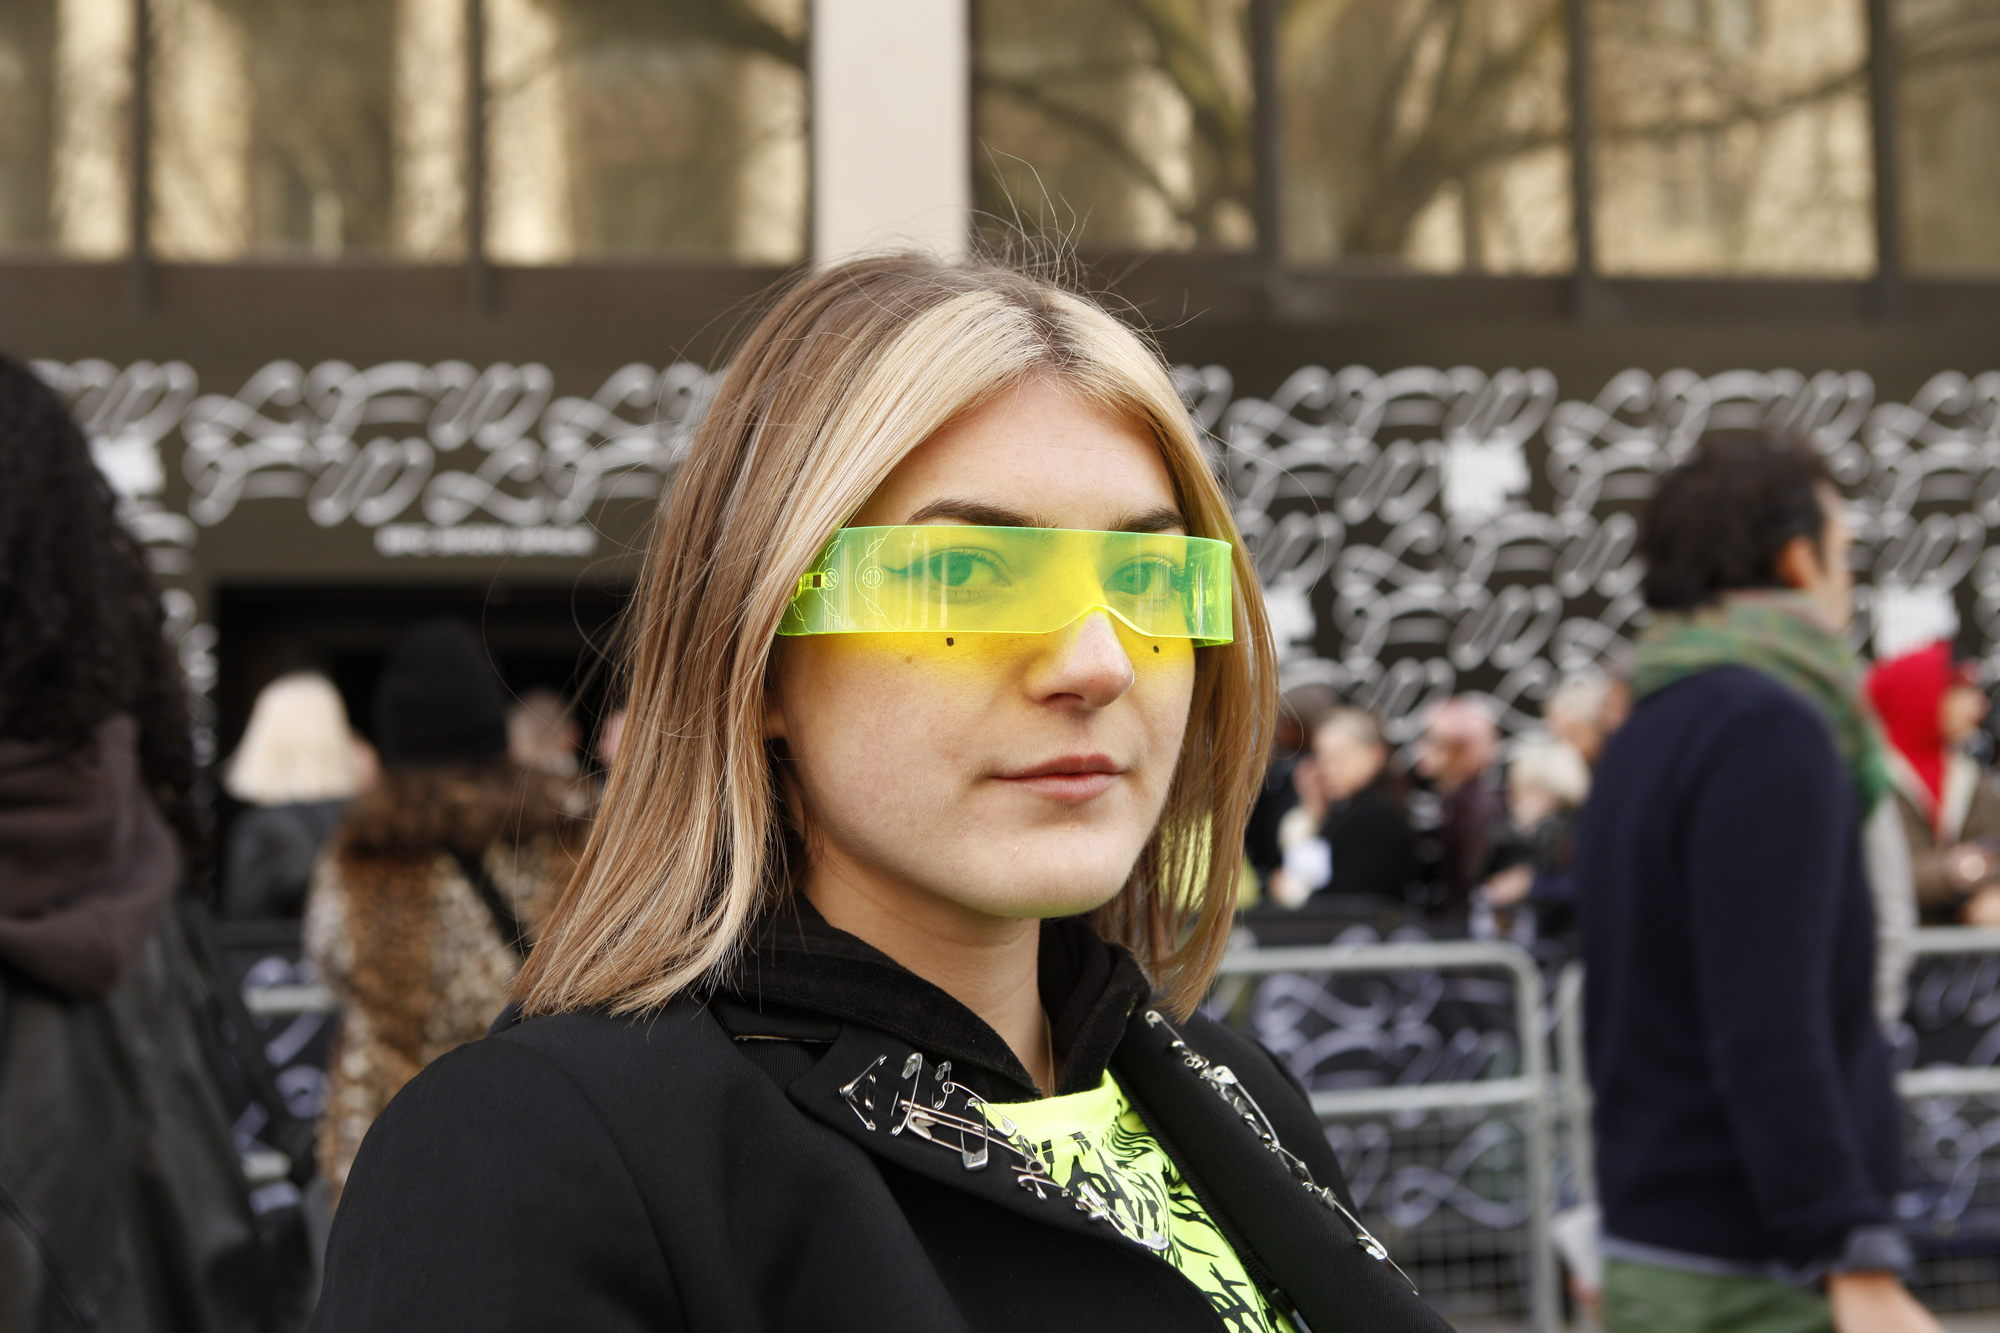 Woman with e-girl highlights wearing sunglasses